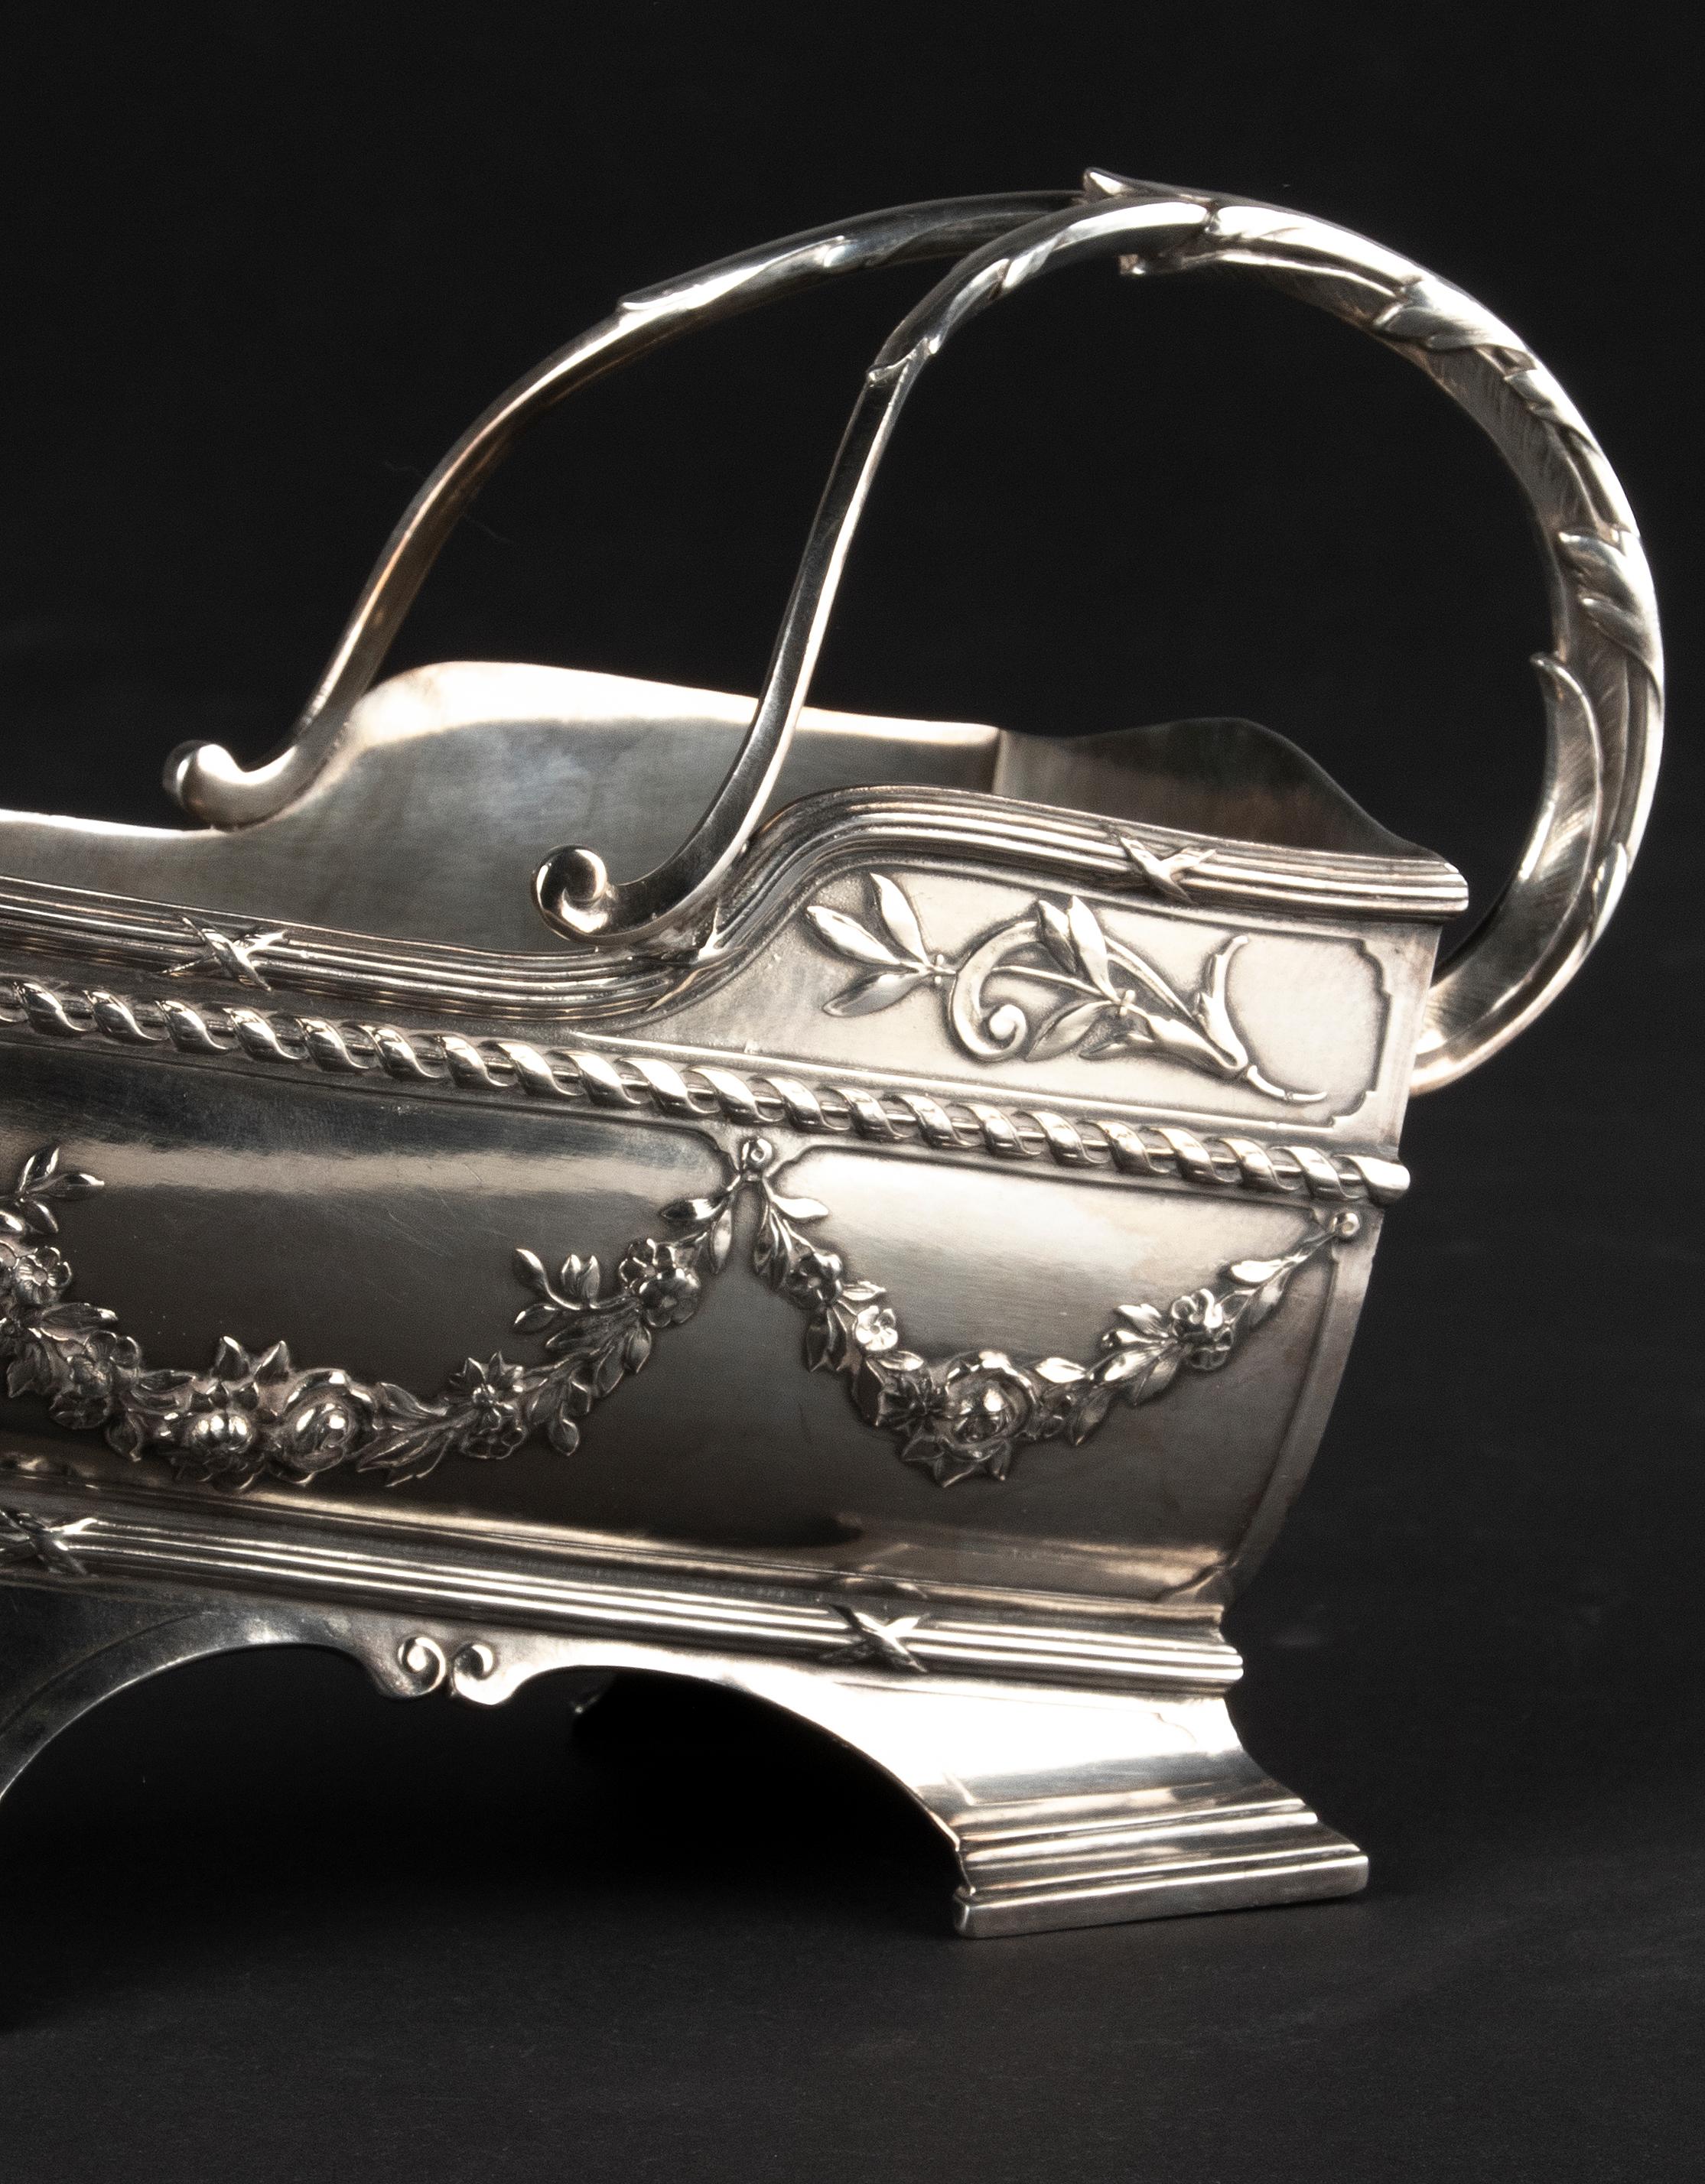 French Silver Plated Wine-Bottle Holder Made by Minerva Louis XVI-Style